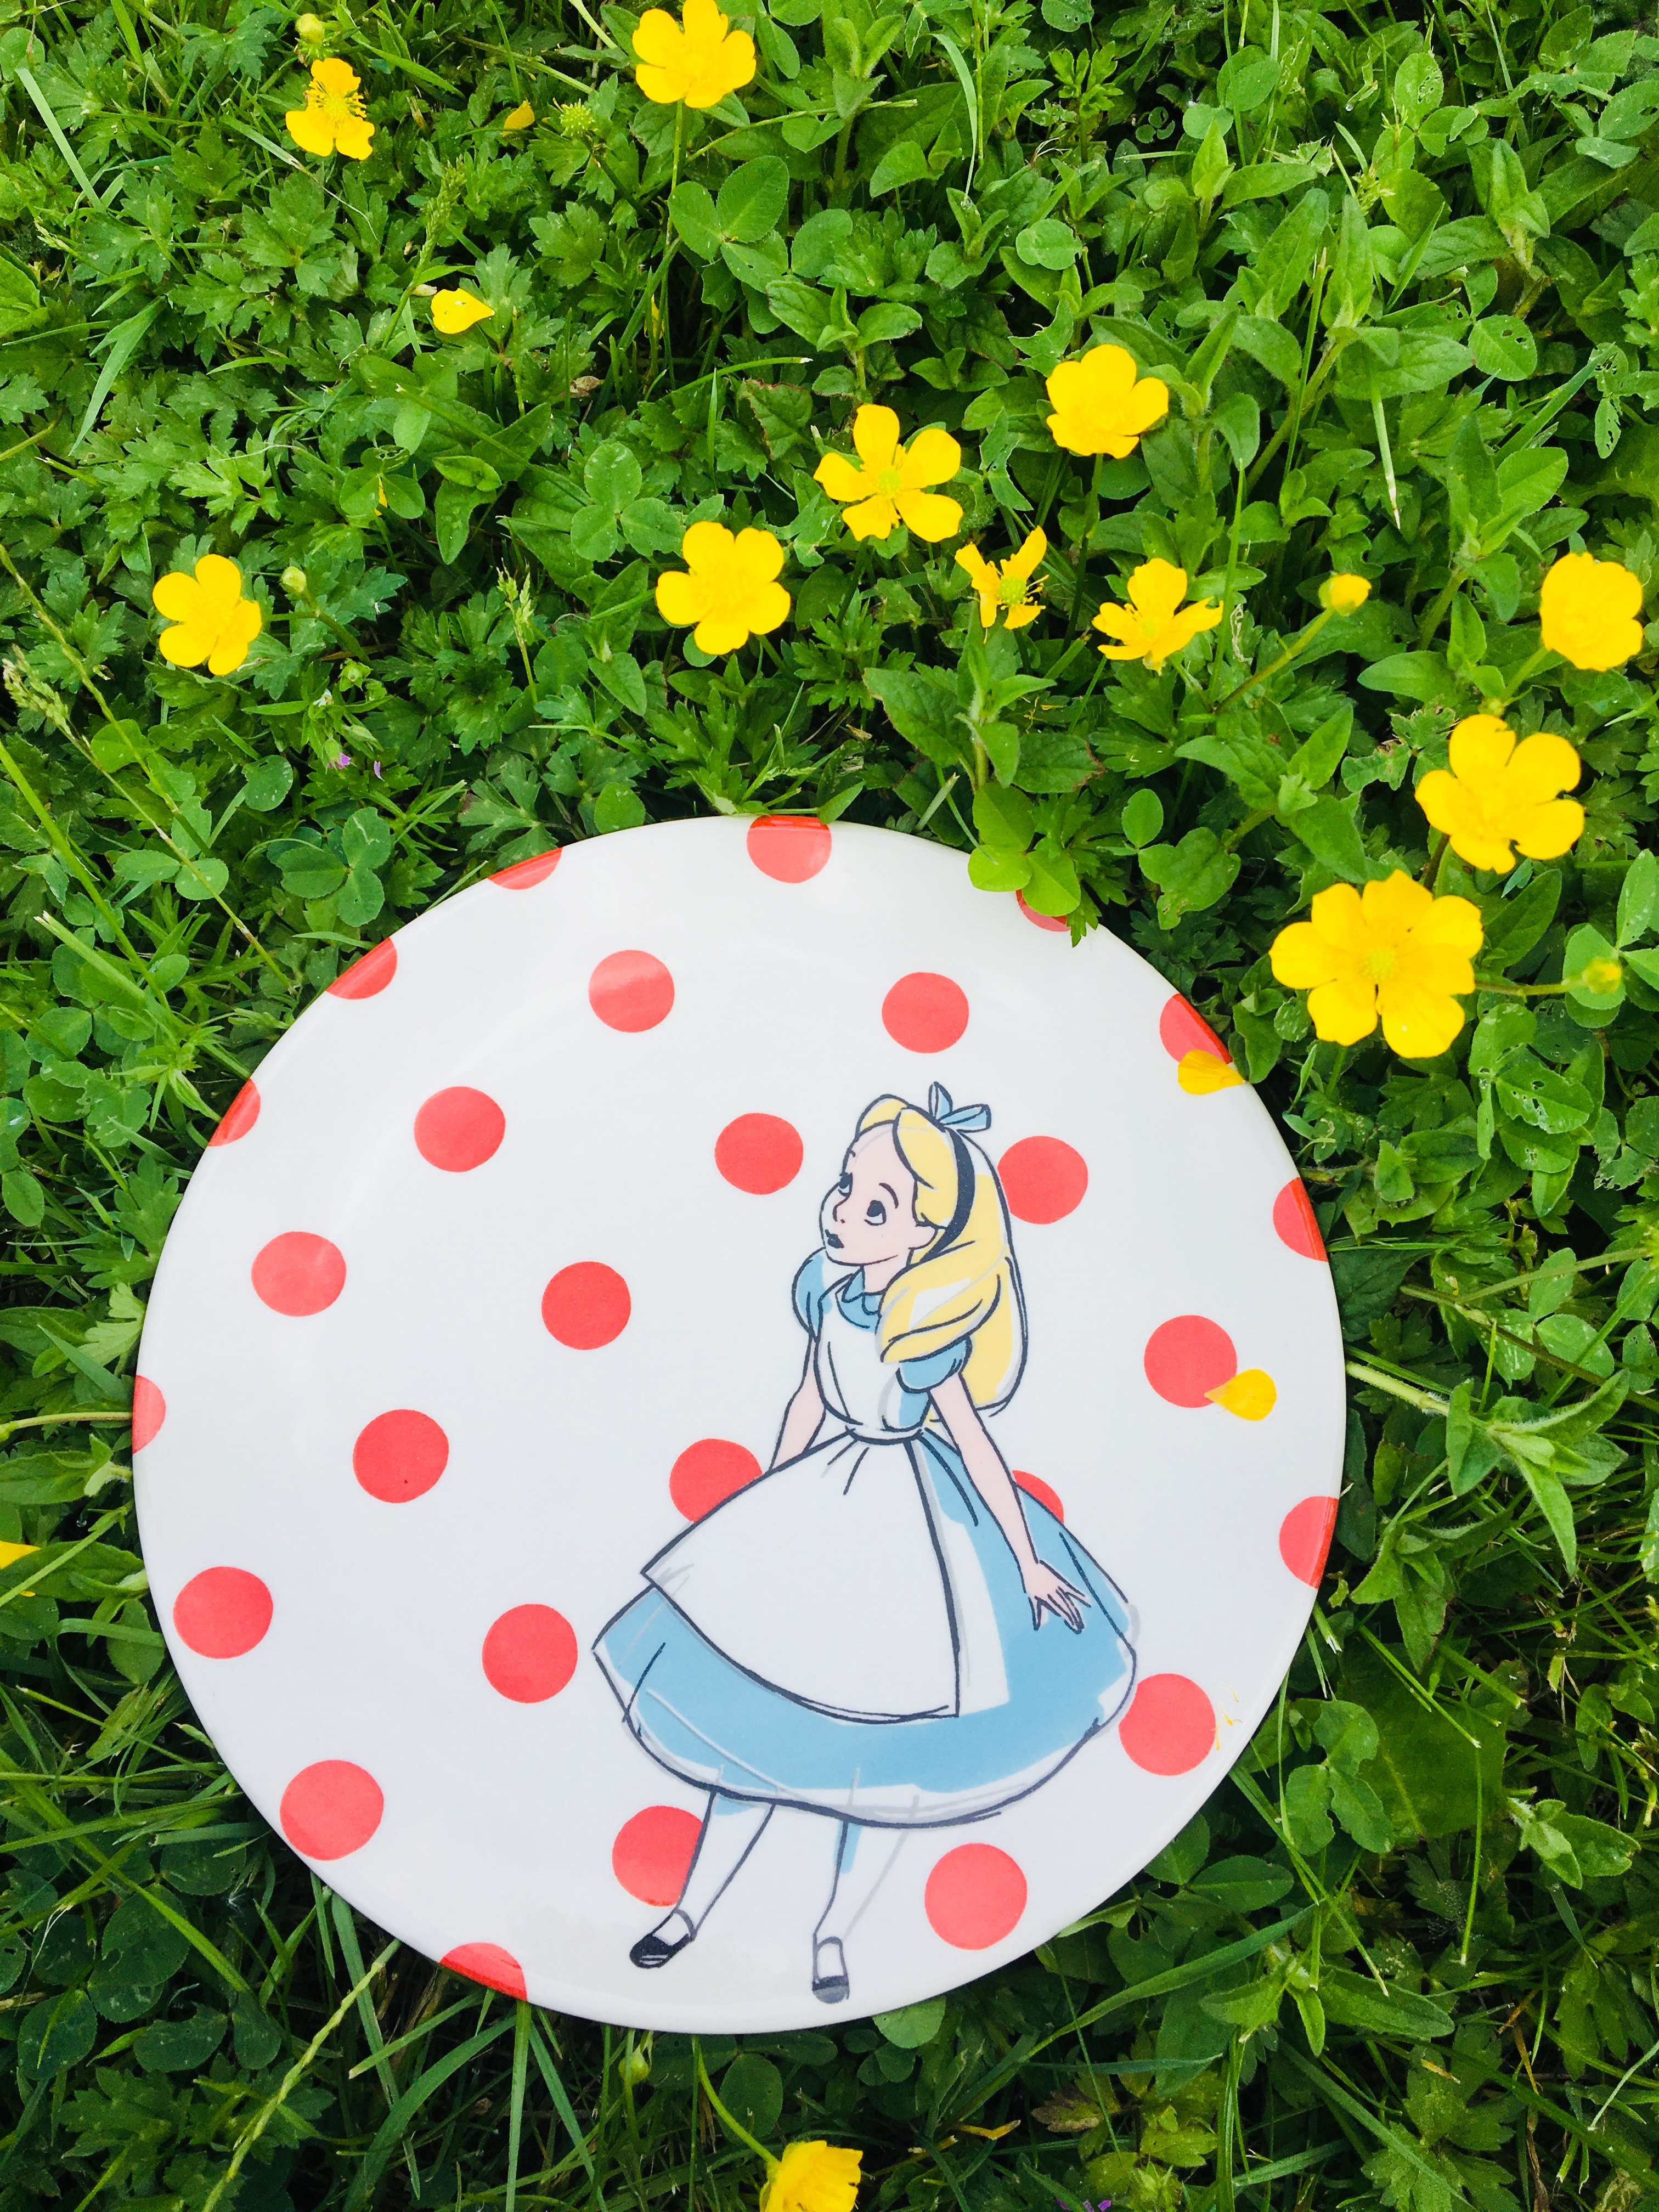 cath kidston beauty and the beast